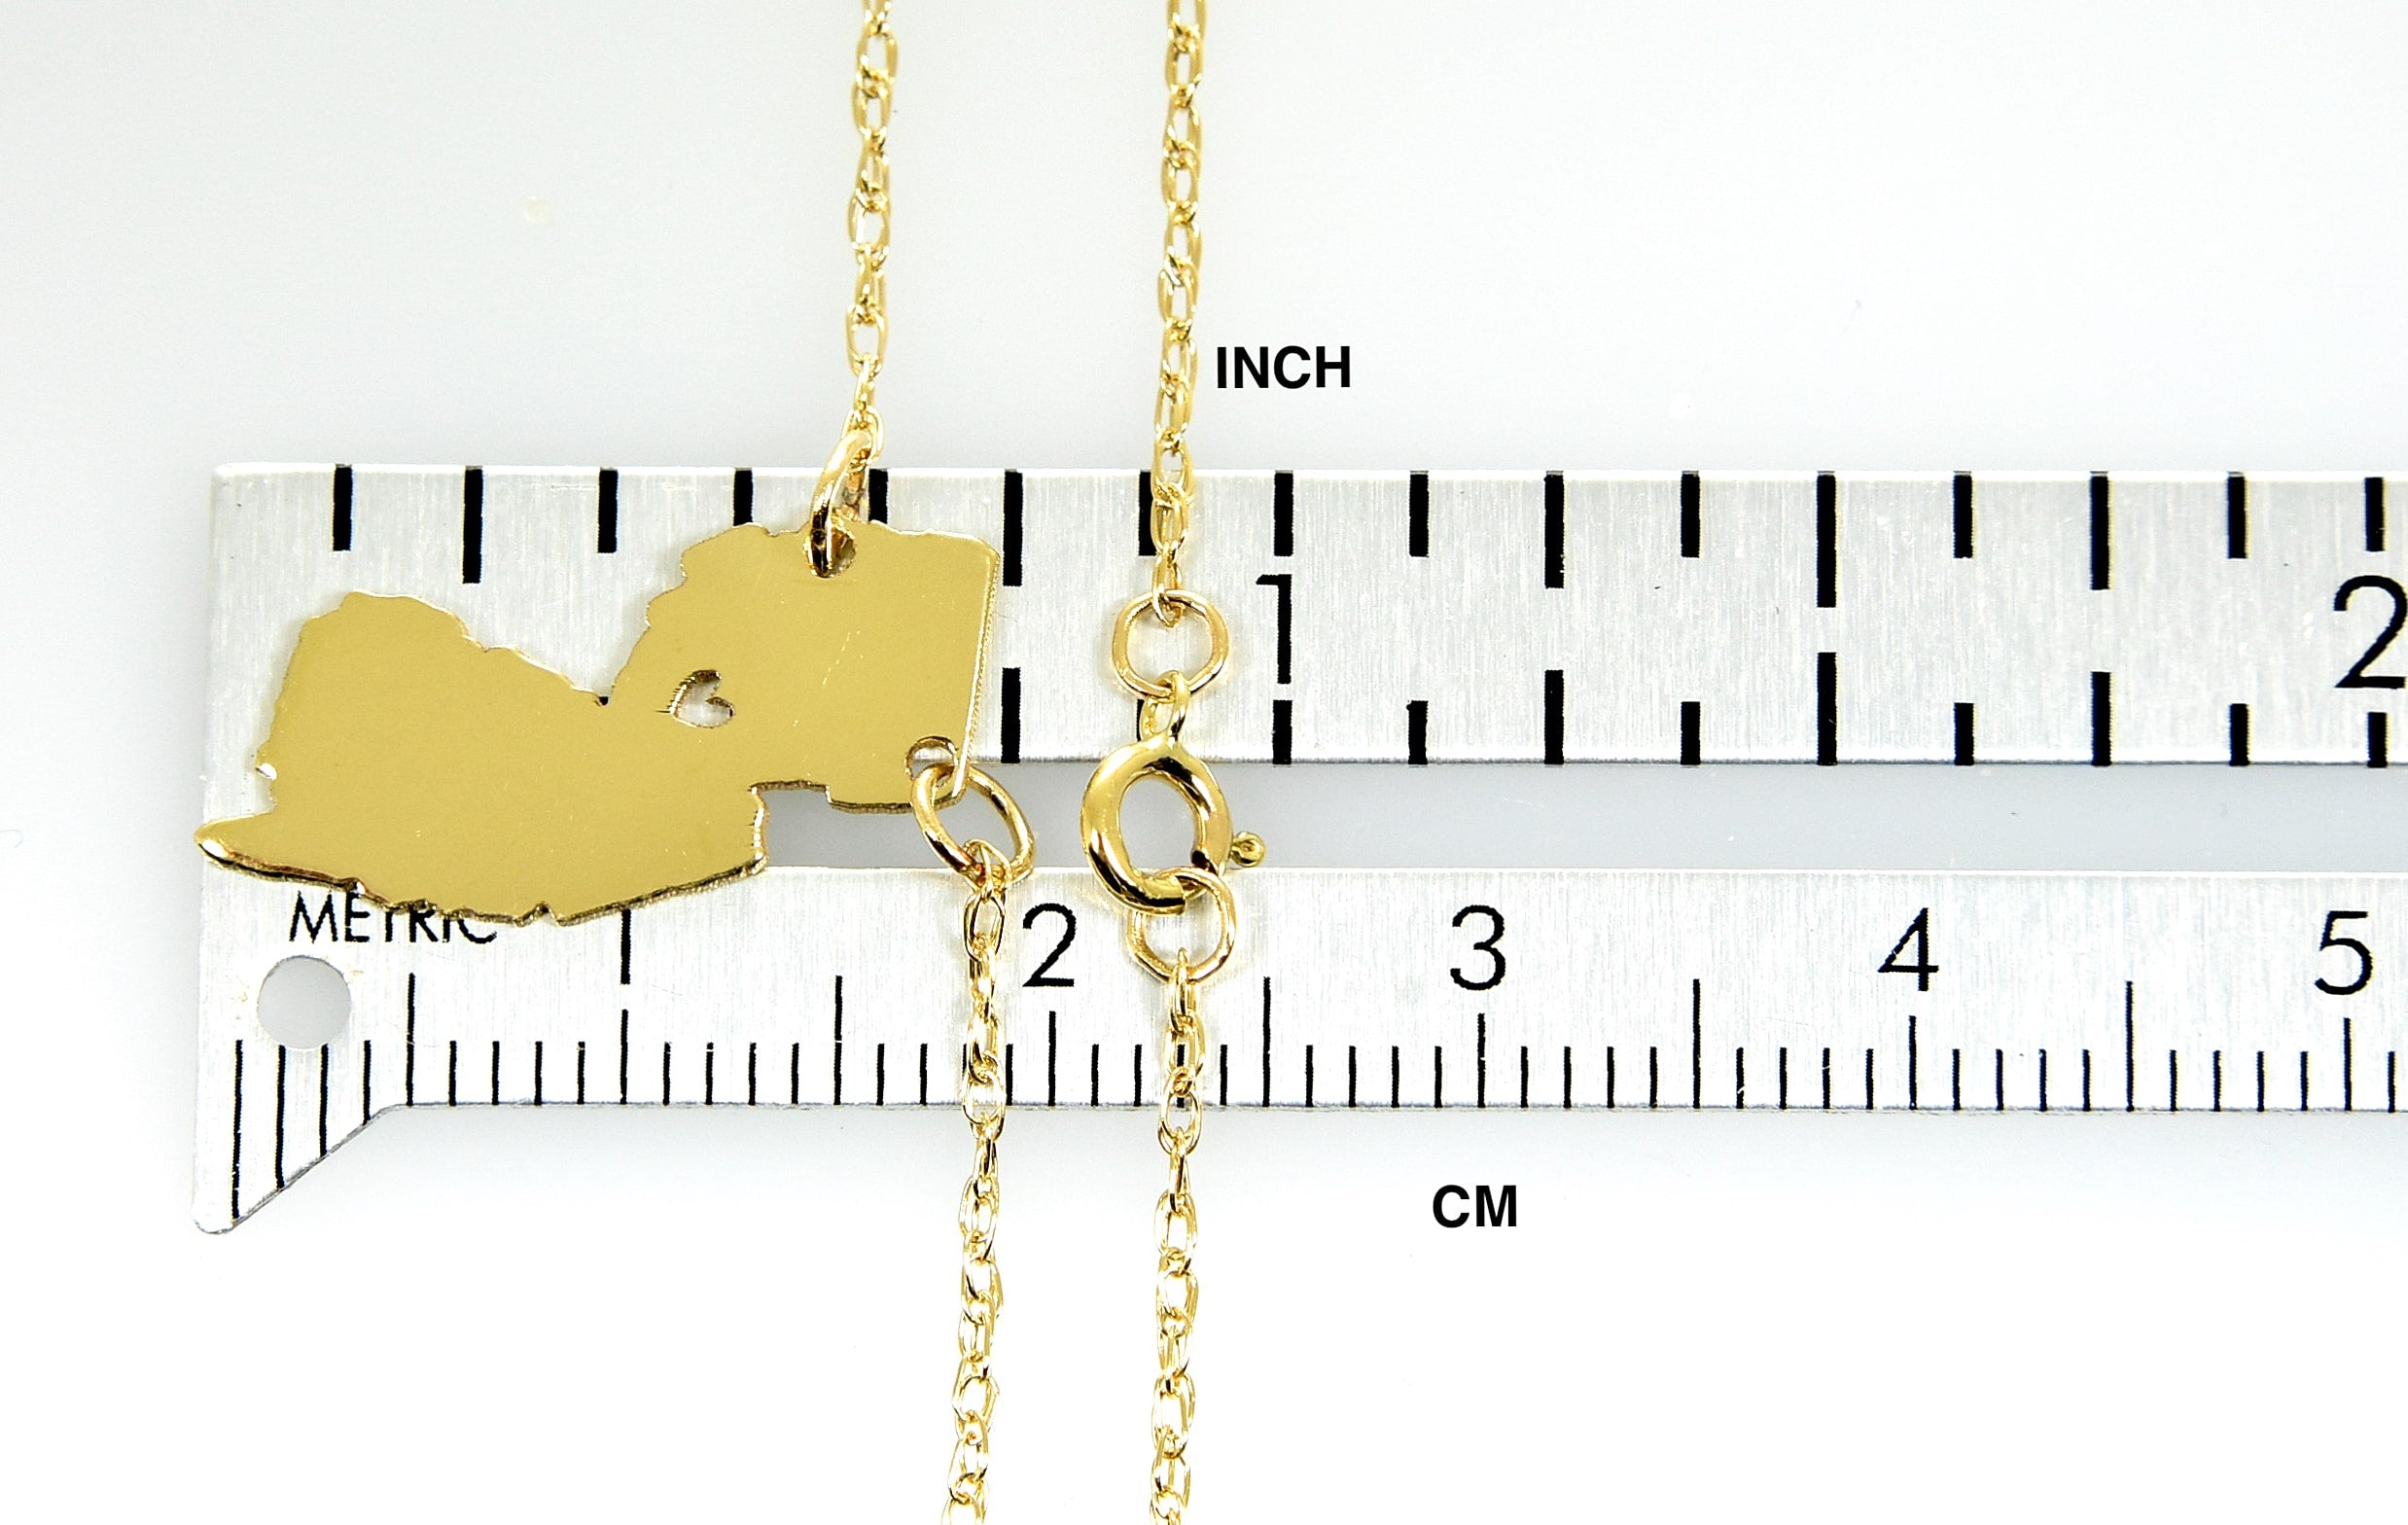 14k Gold 10k Gold Silver New Jersey State Heart Personalized City Necklace